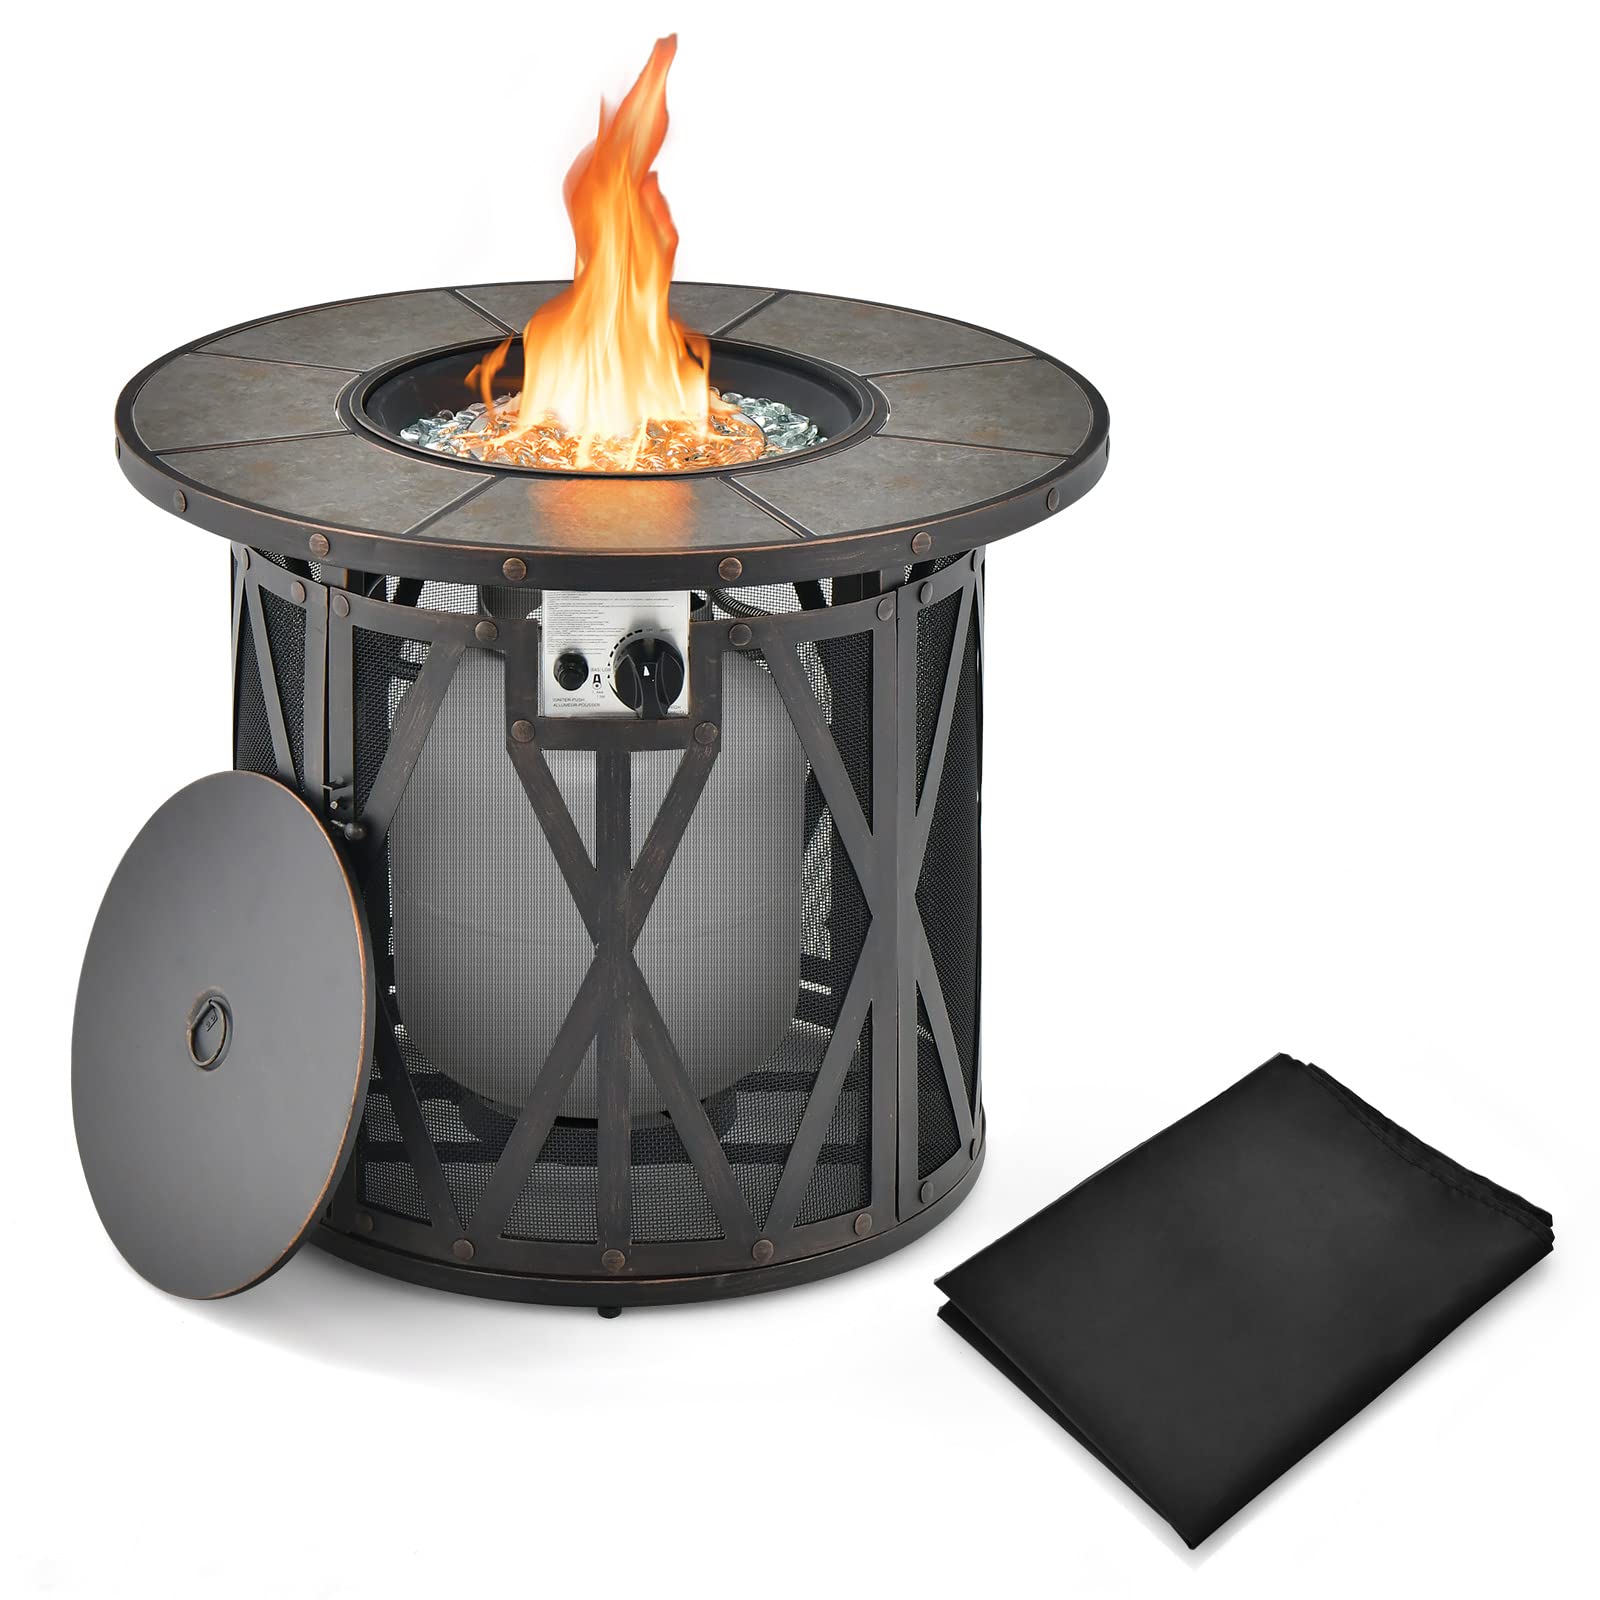 Giantex 32" Gas Fire Pit Table - 30,000 BTU Round Outdoor Fire Pit with Lid, PVC Cover, Glass Stones, Black